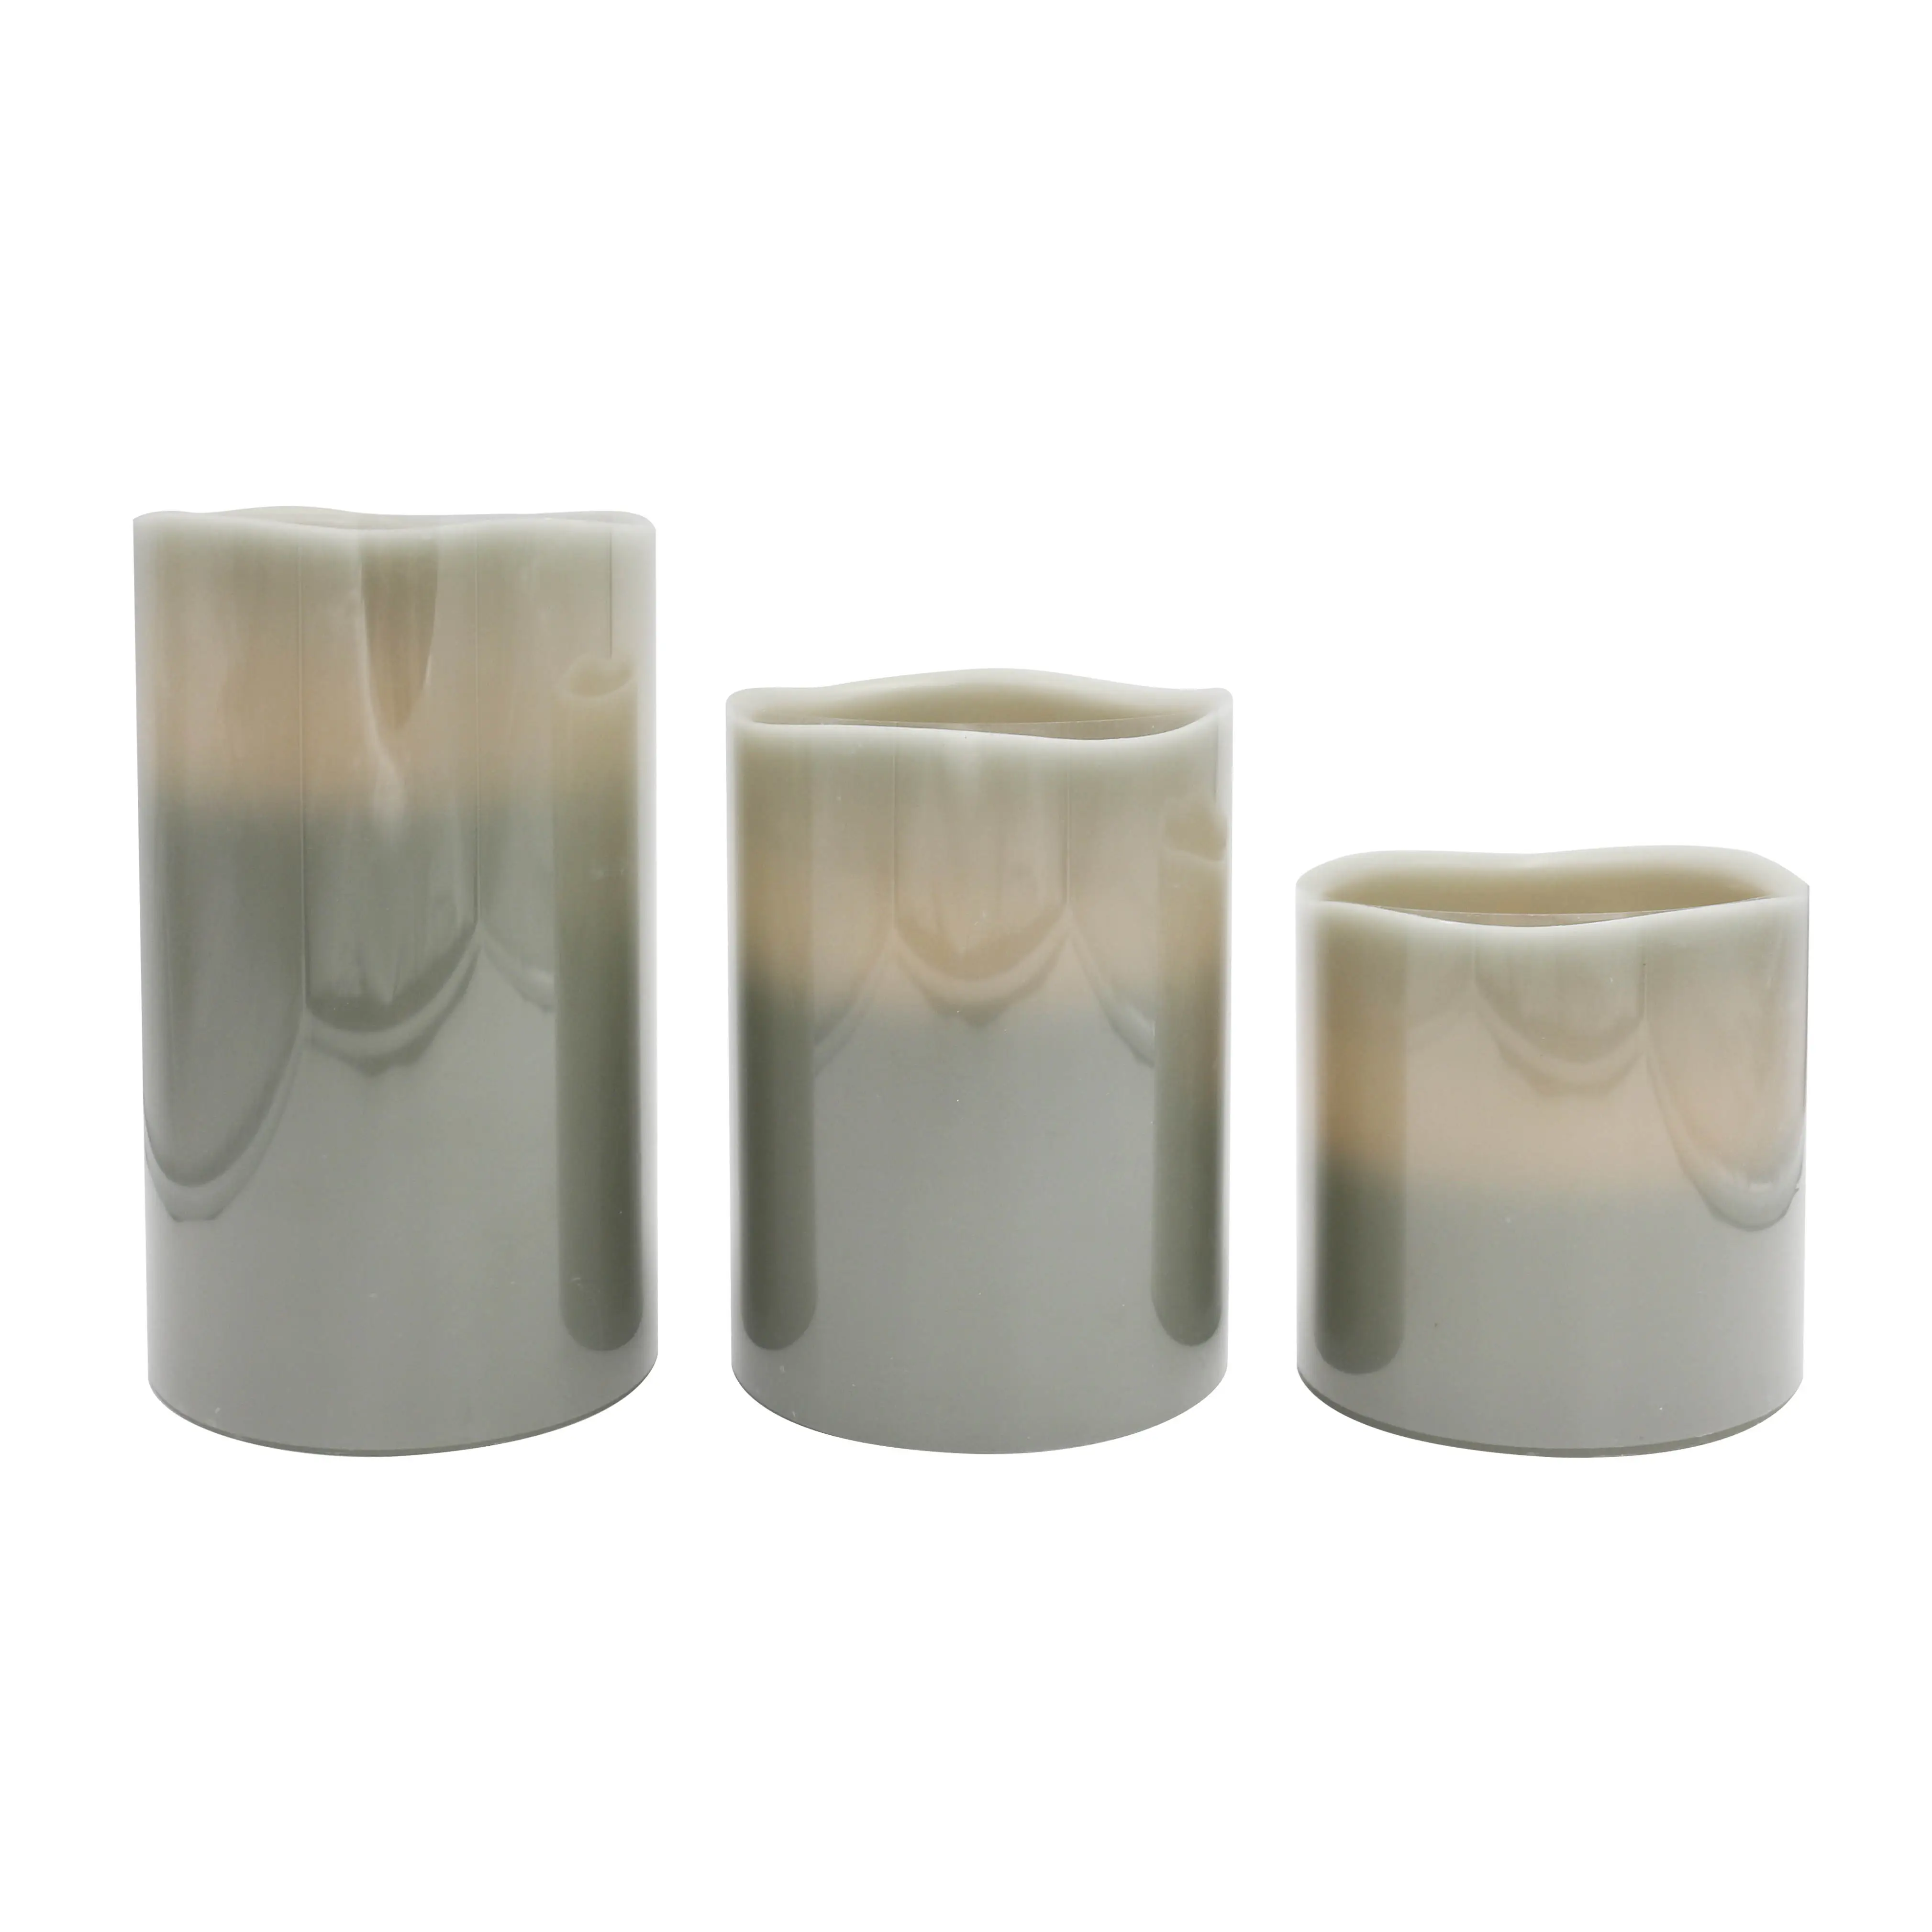 Simple irregular cylindrical led wax candle for bedroom home dinner table decor(set of 3)